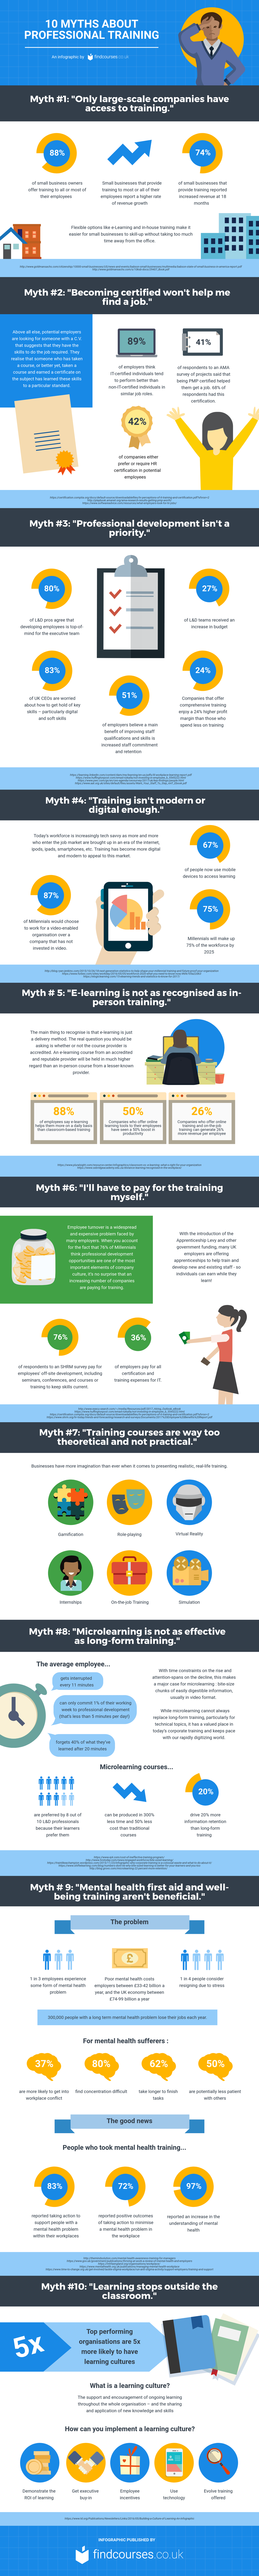 10 Myths About Professional Training